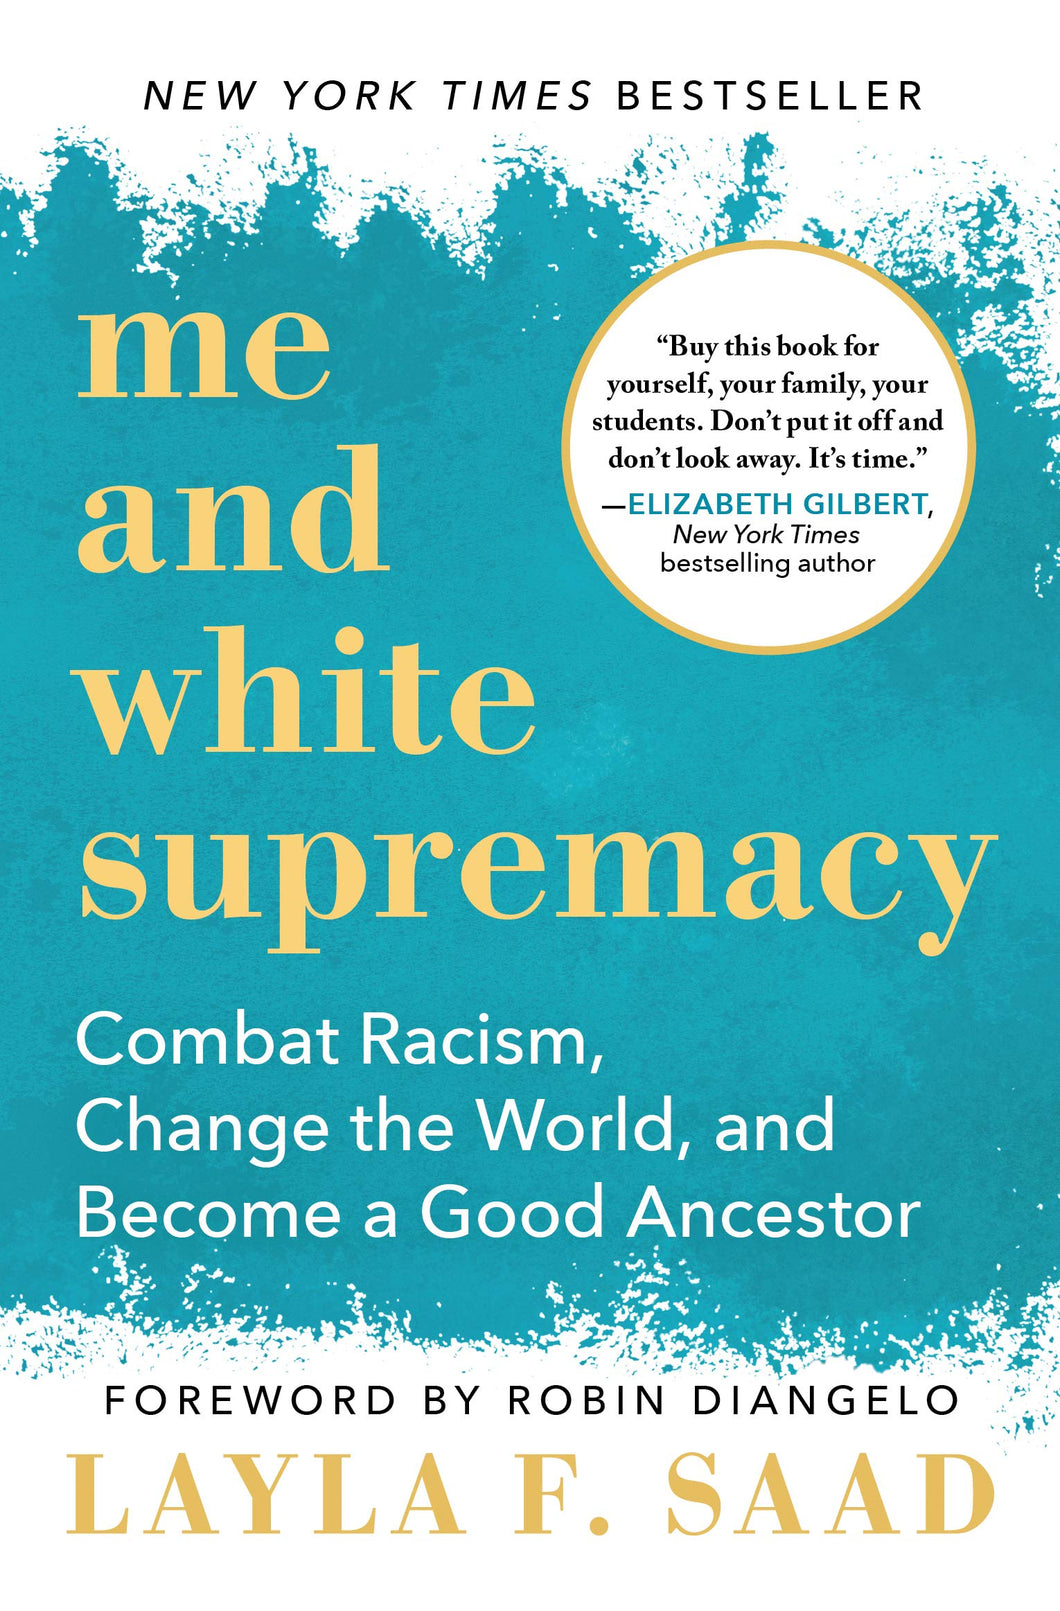 Me and White Supremacy: Combat Racism, Change the World, and Become a Good Ancestor [Layla Saad]